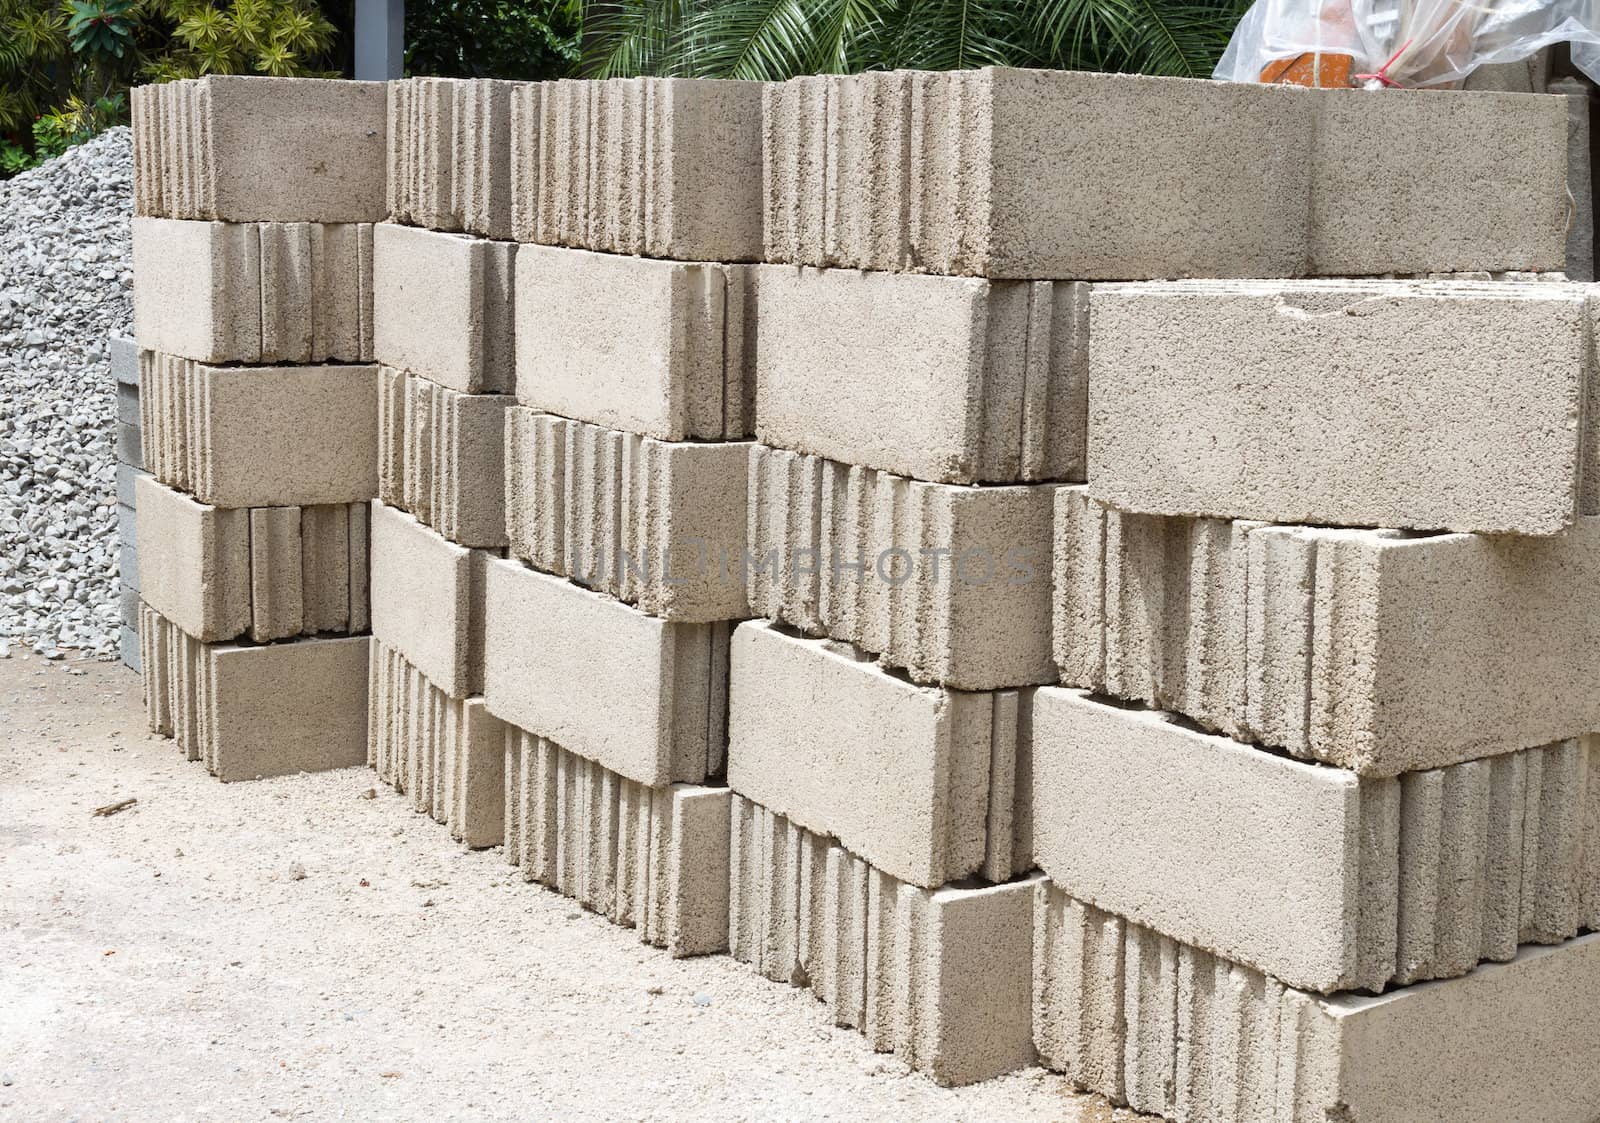 Pile of Concrete Block with rock